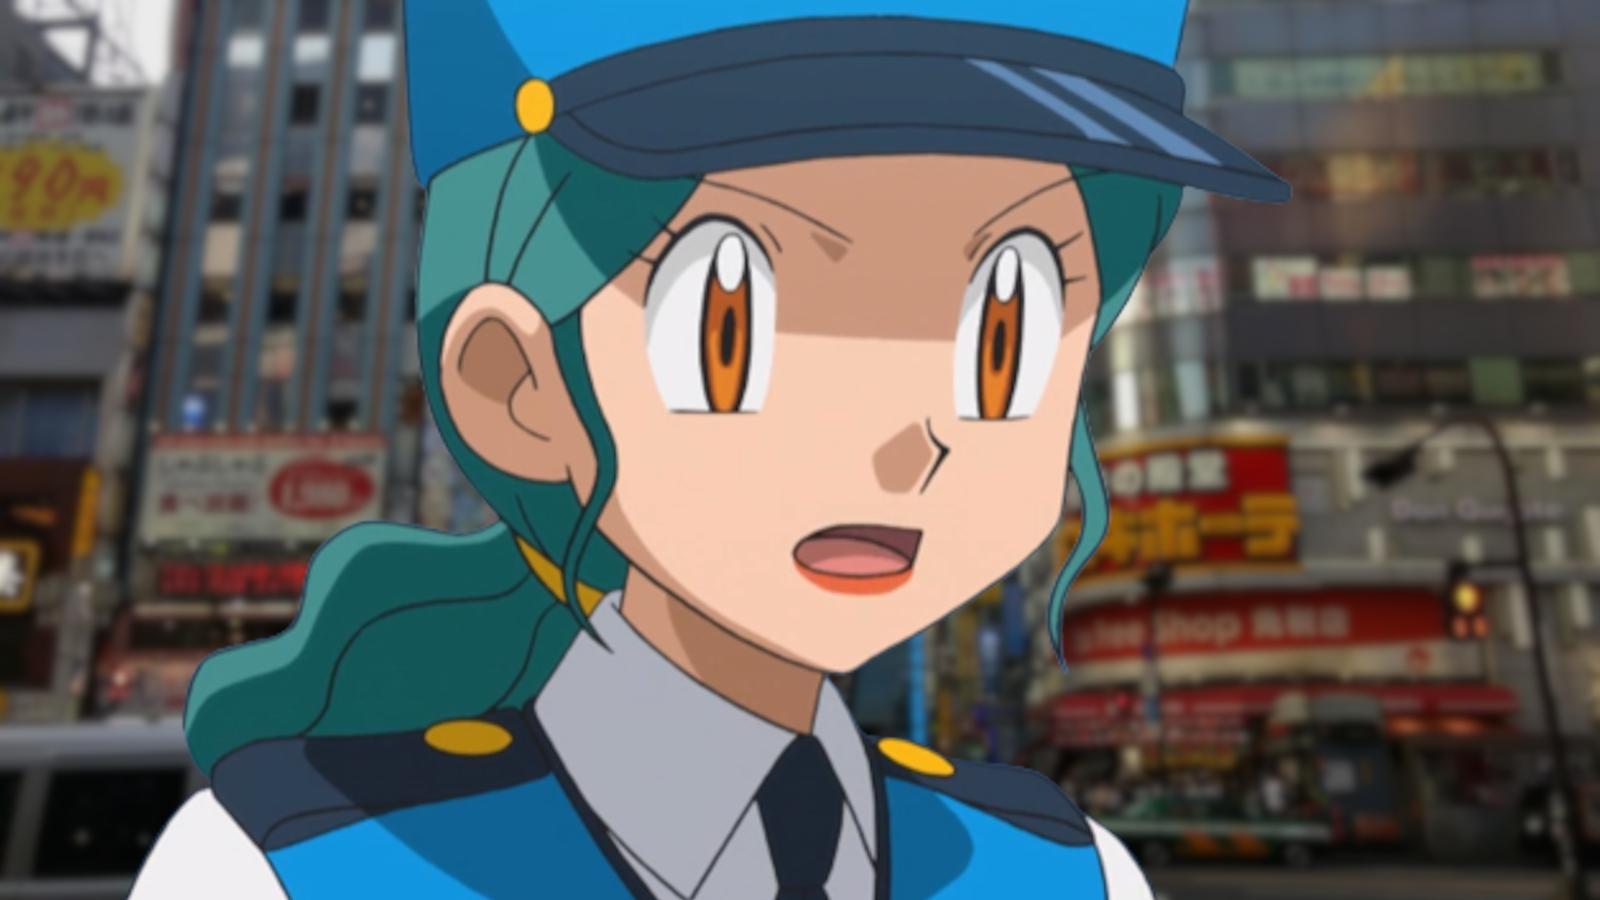 Tokyo police stunned by series of pokemon card crimes